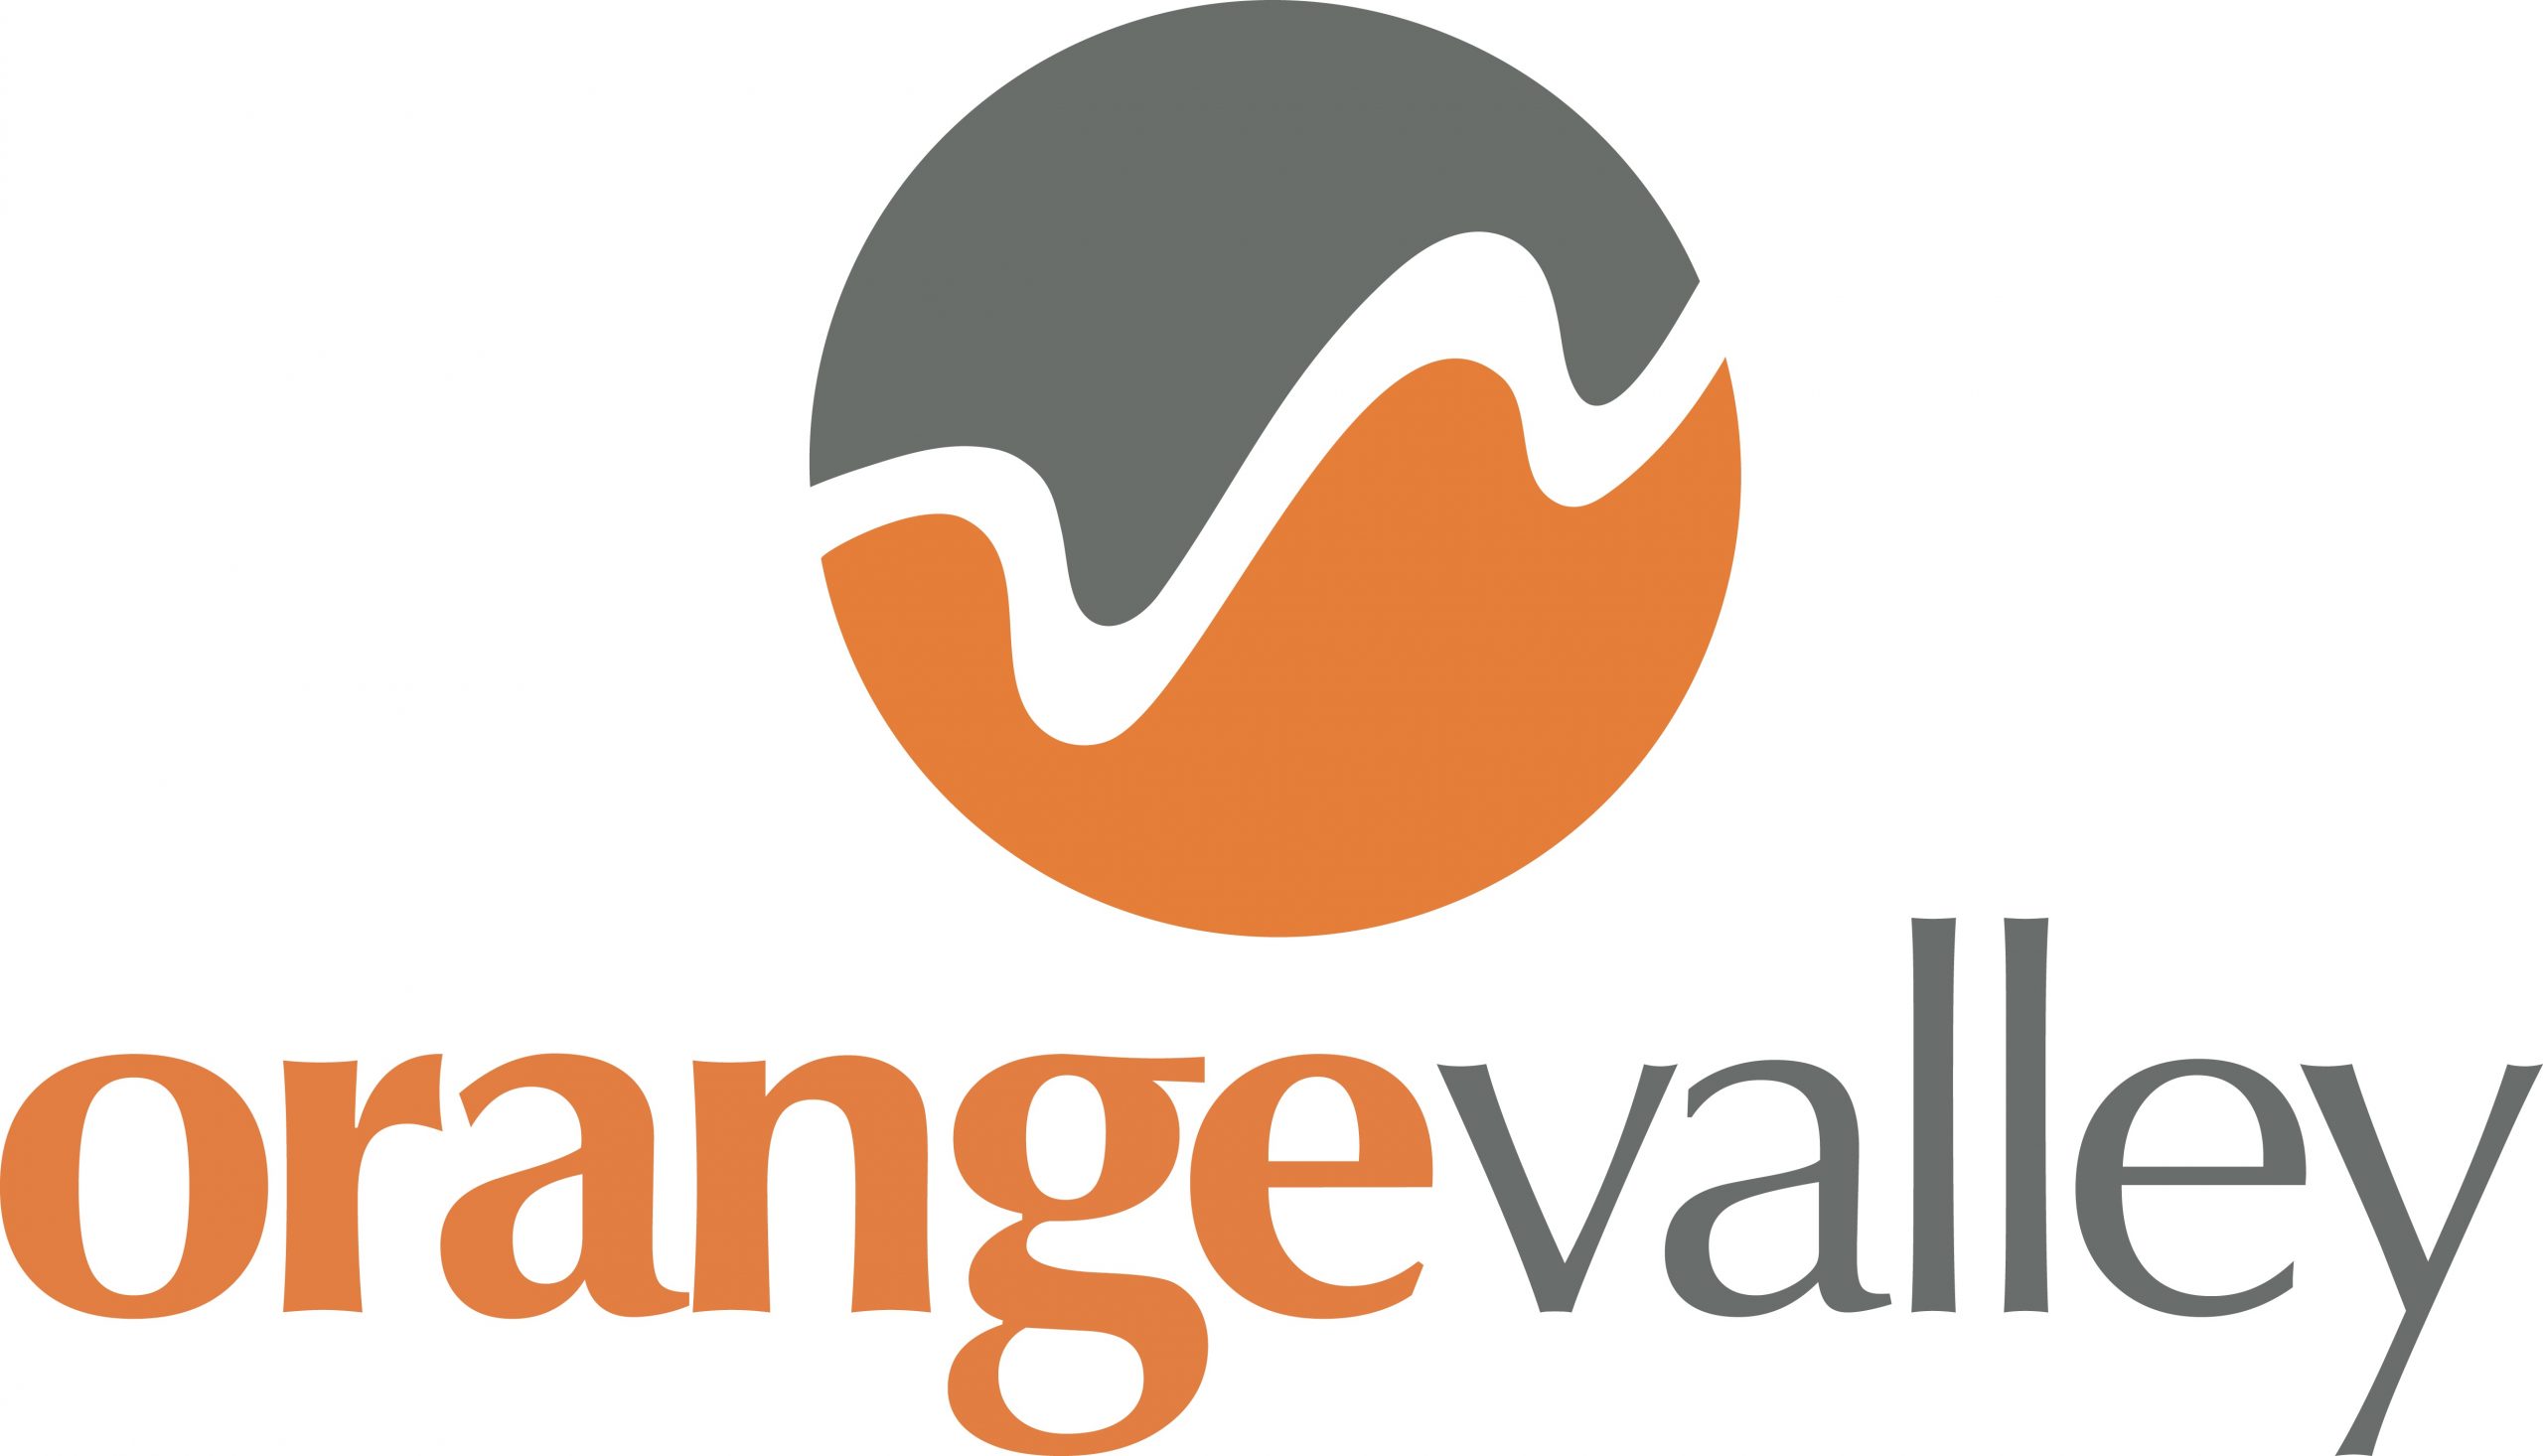 Image: OrangeValley share how honoured they are to win a Silver Award at the European Search Awards